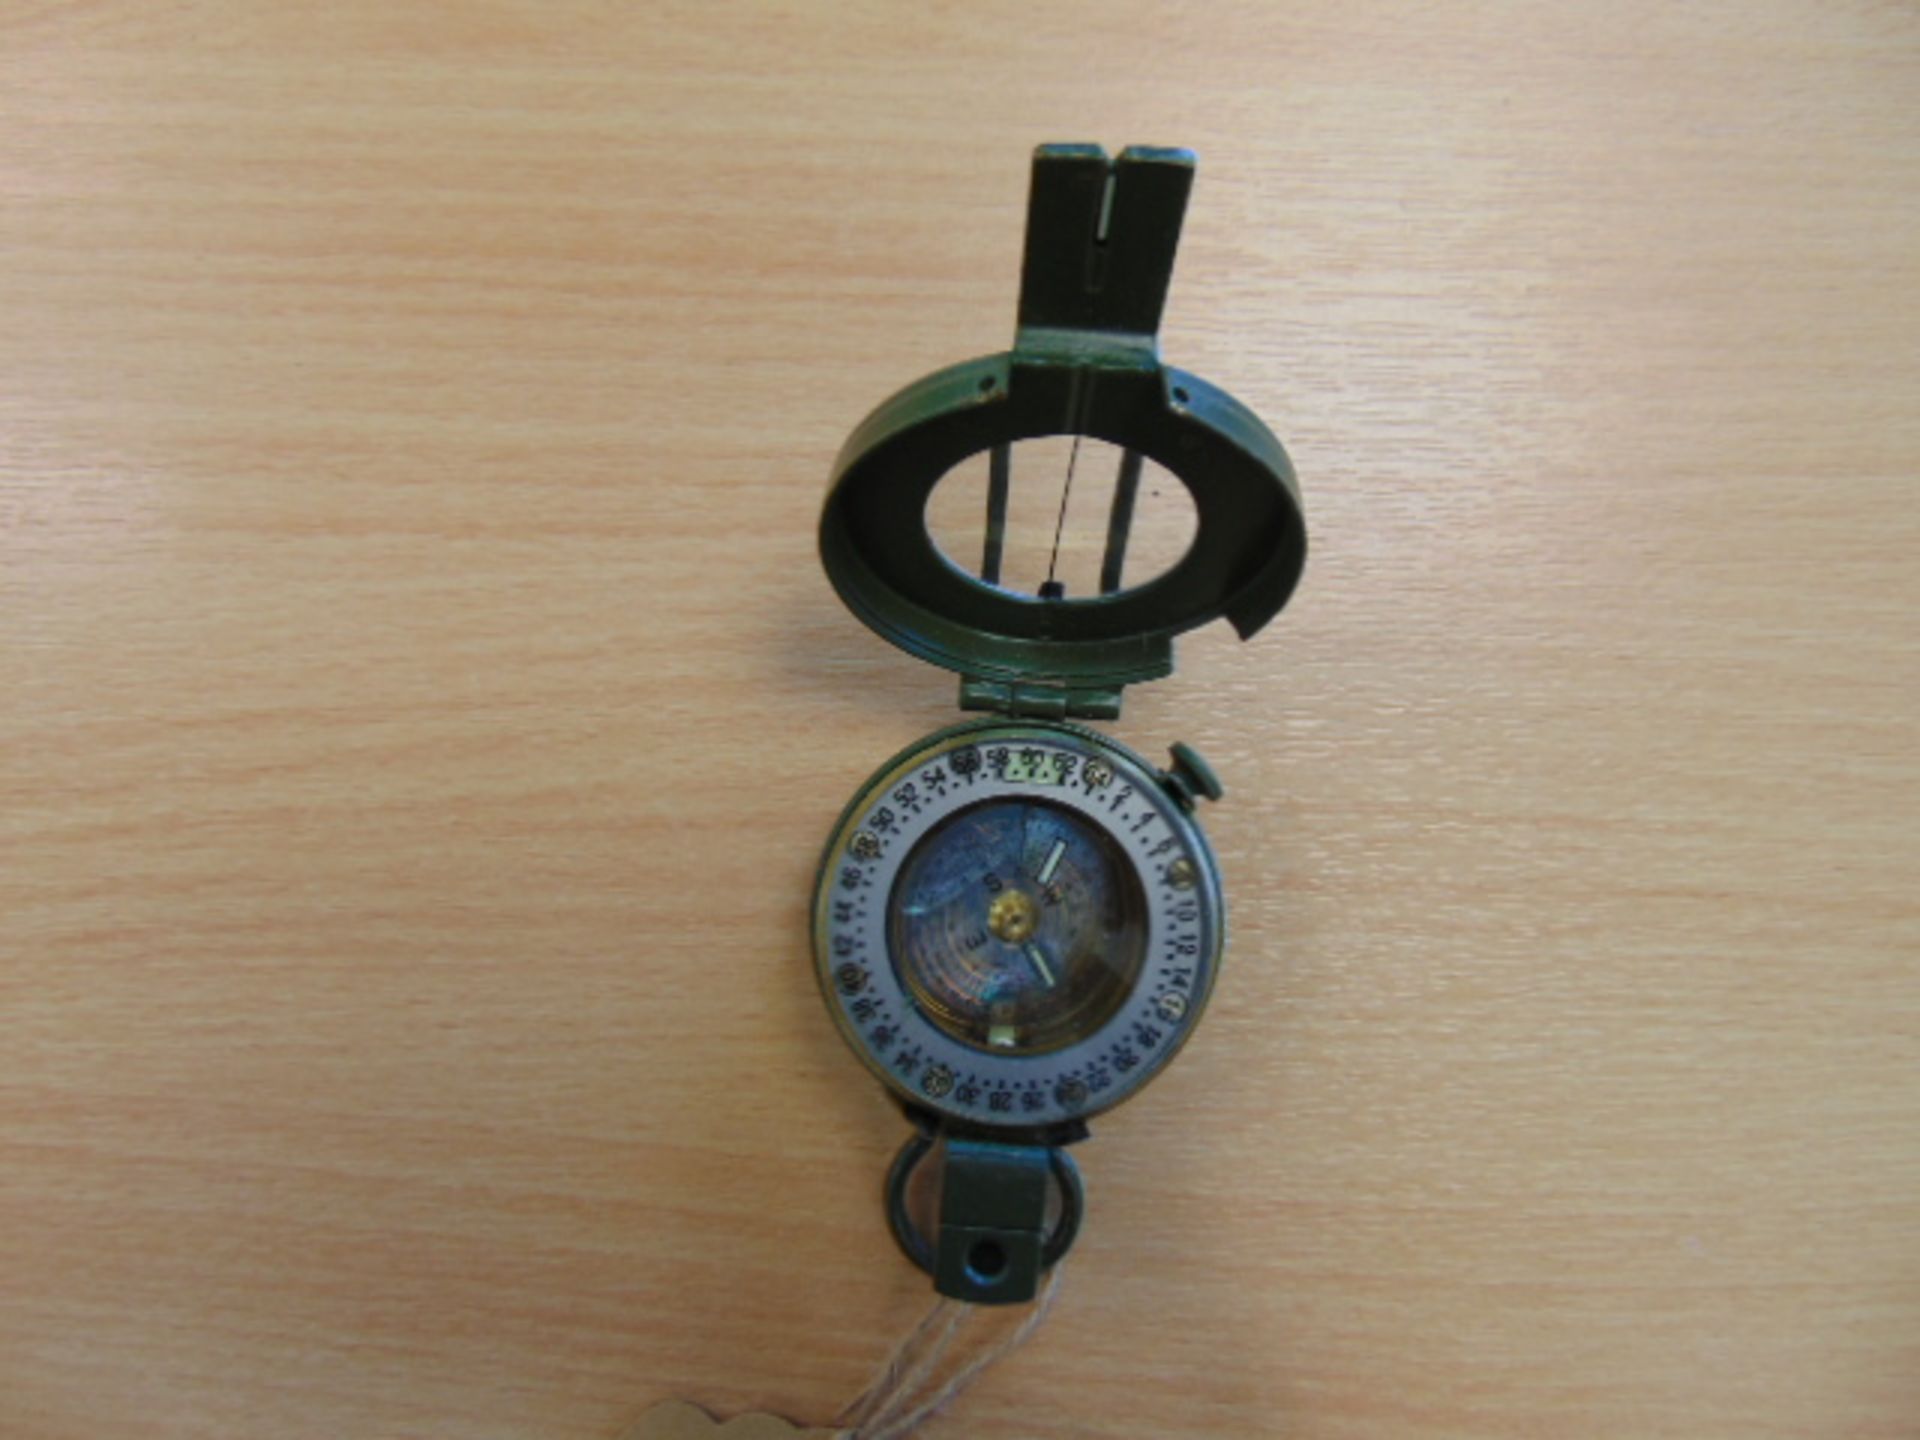 Stanley London British Army Brass Prismatic Compass in Mils, Made in UK - Image 2 of 3